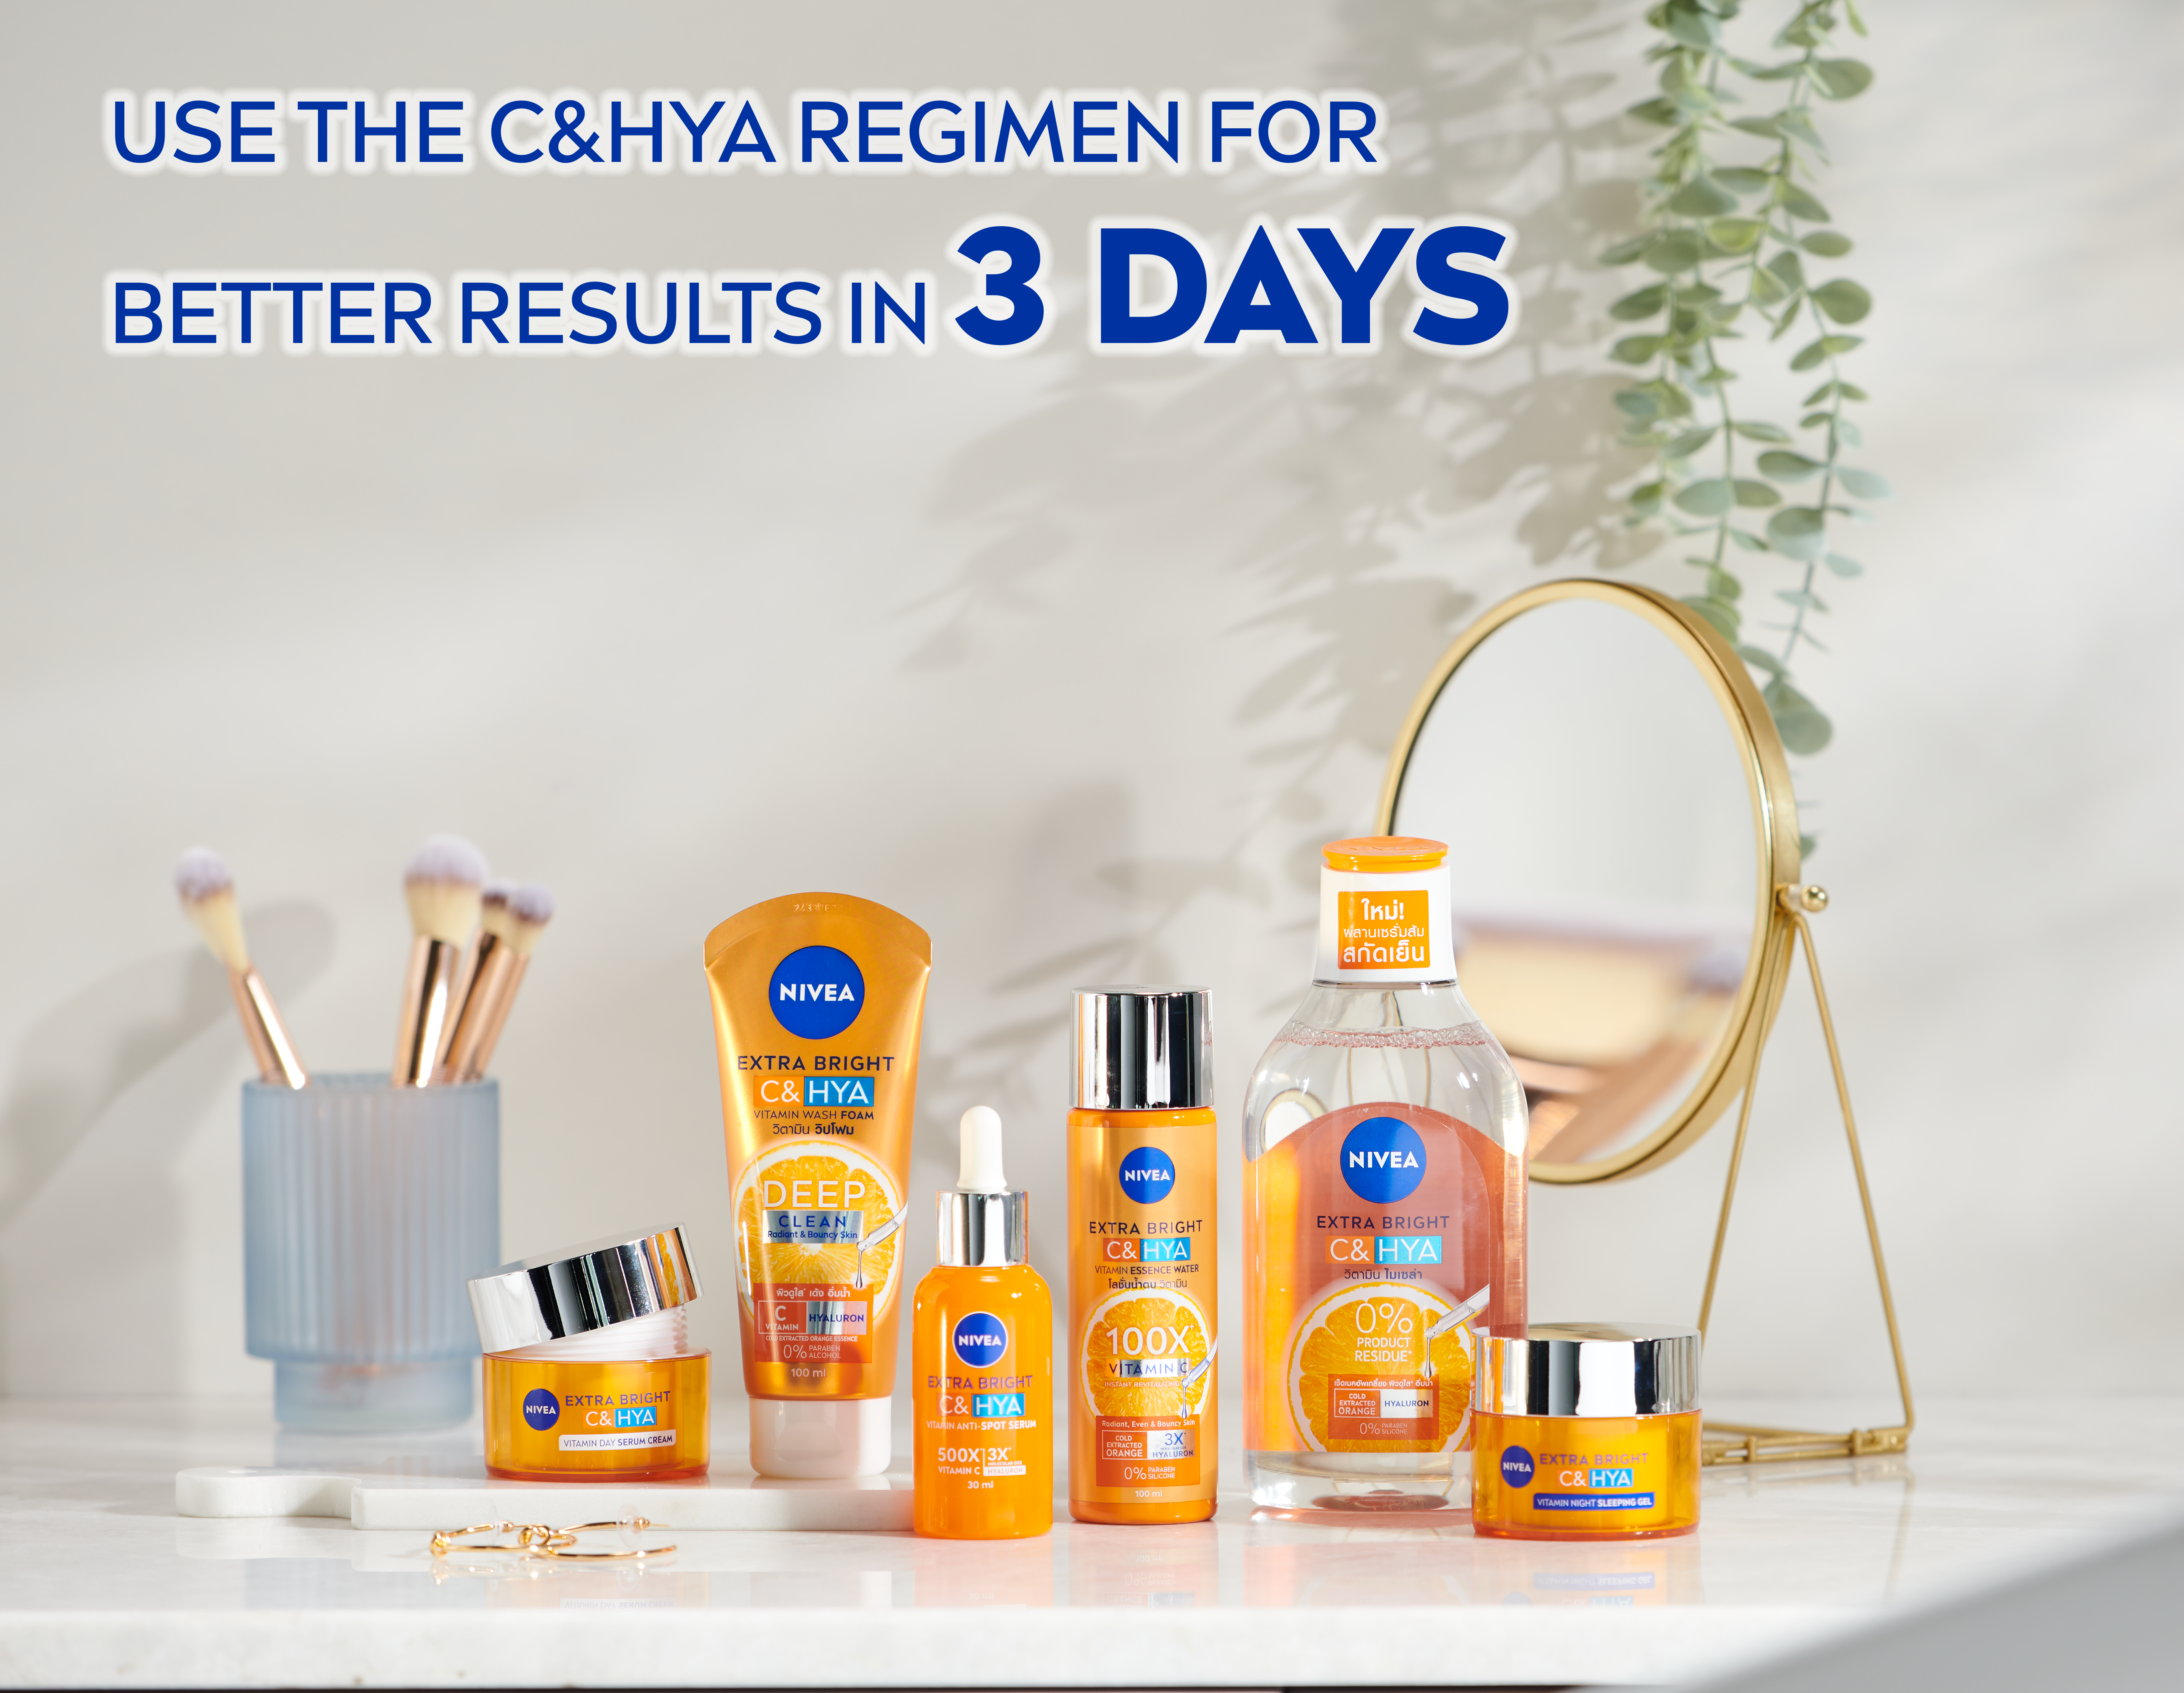 Image from NIVEA (Provided to SAYS)